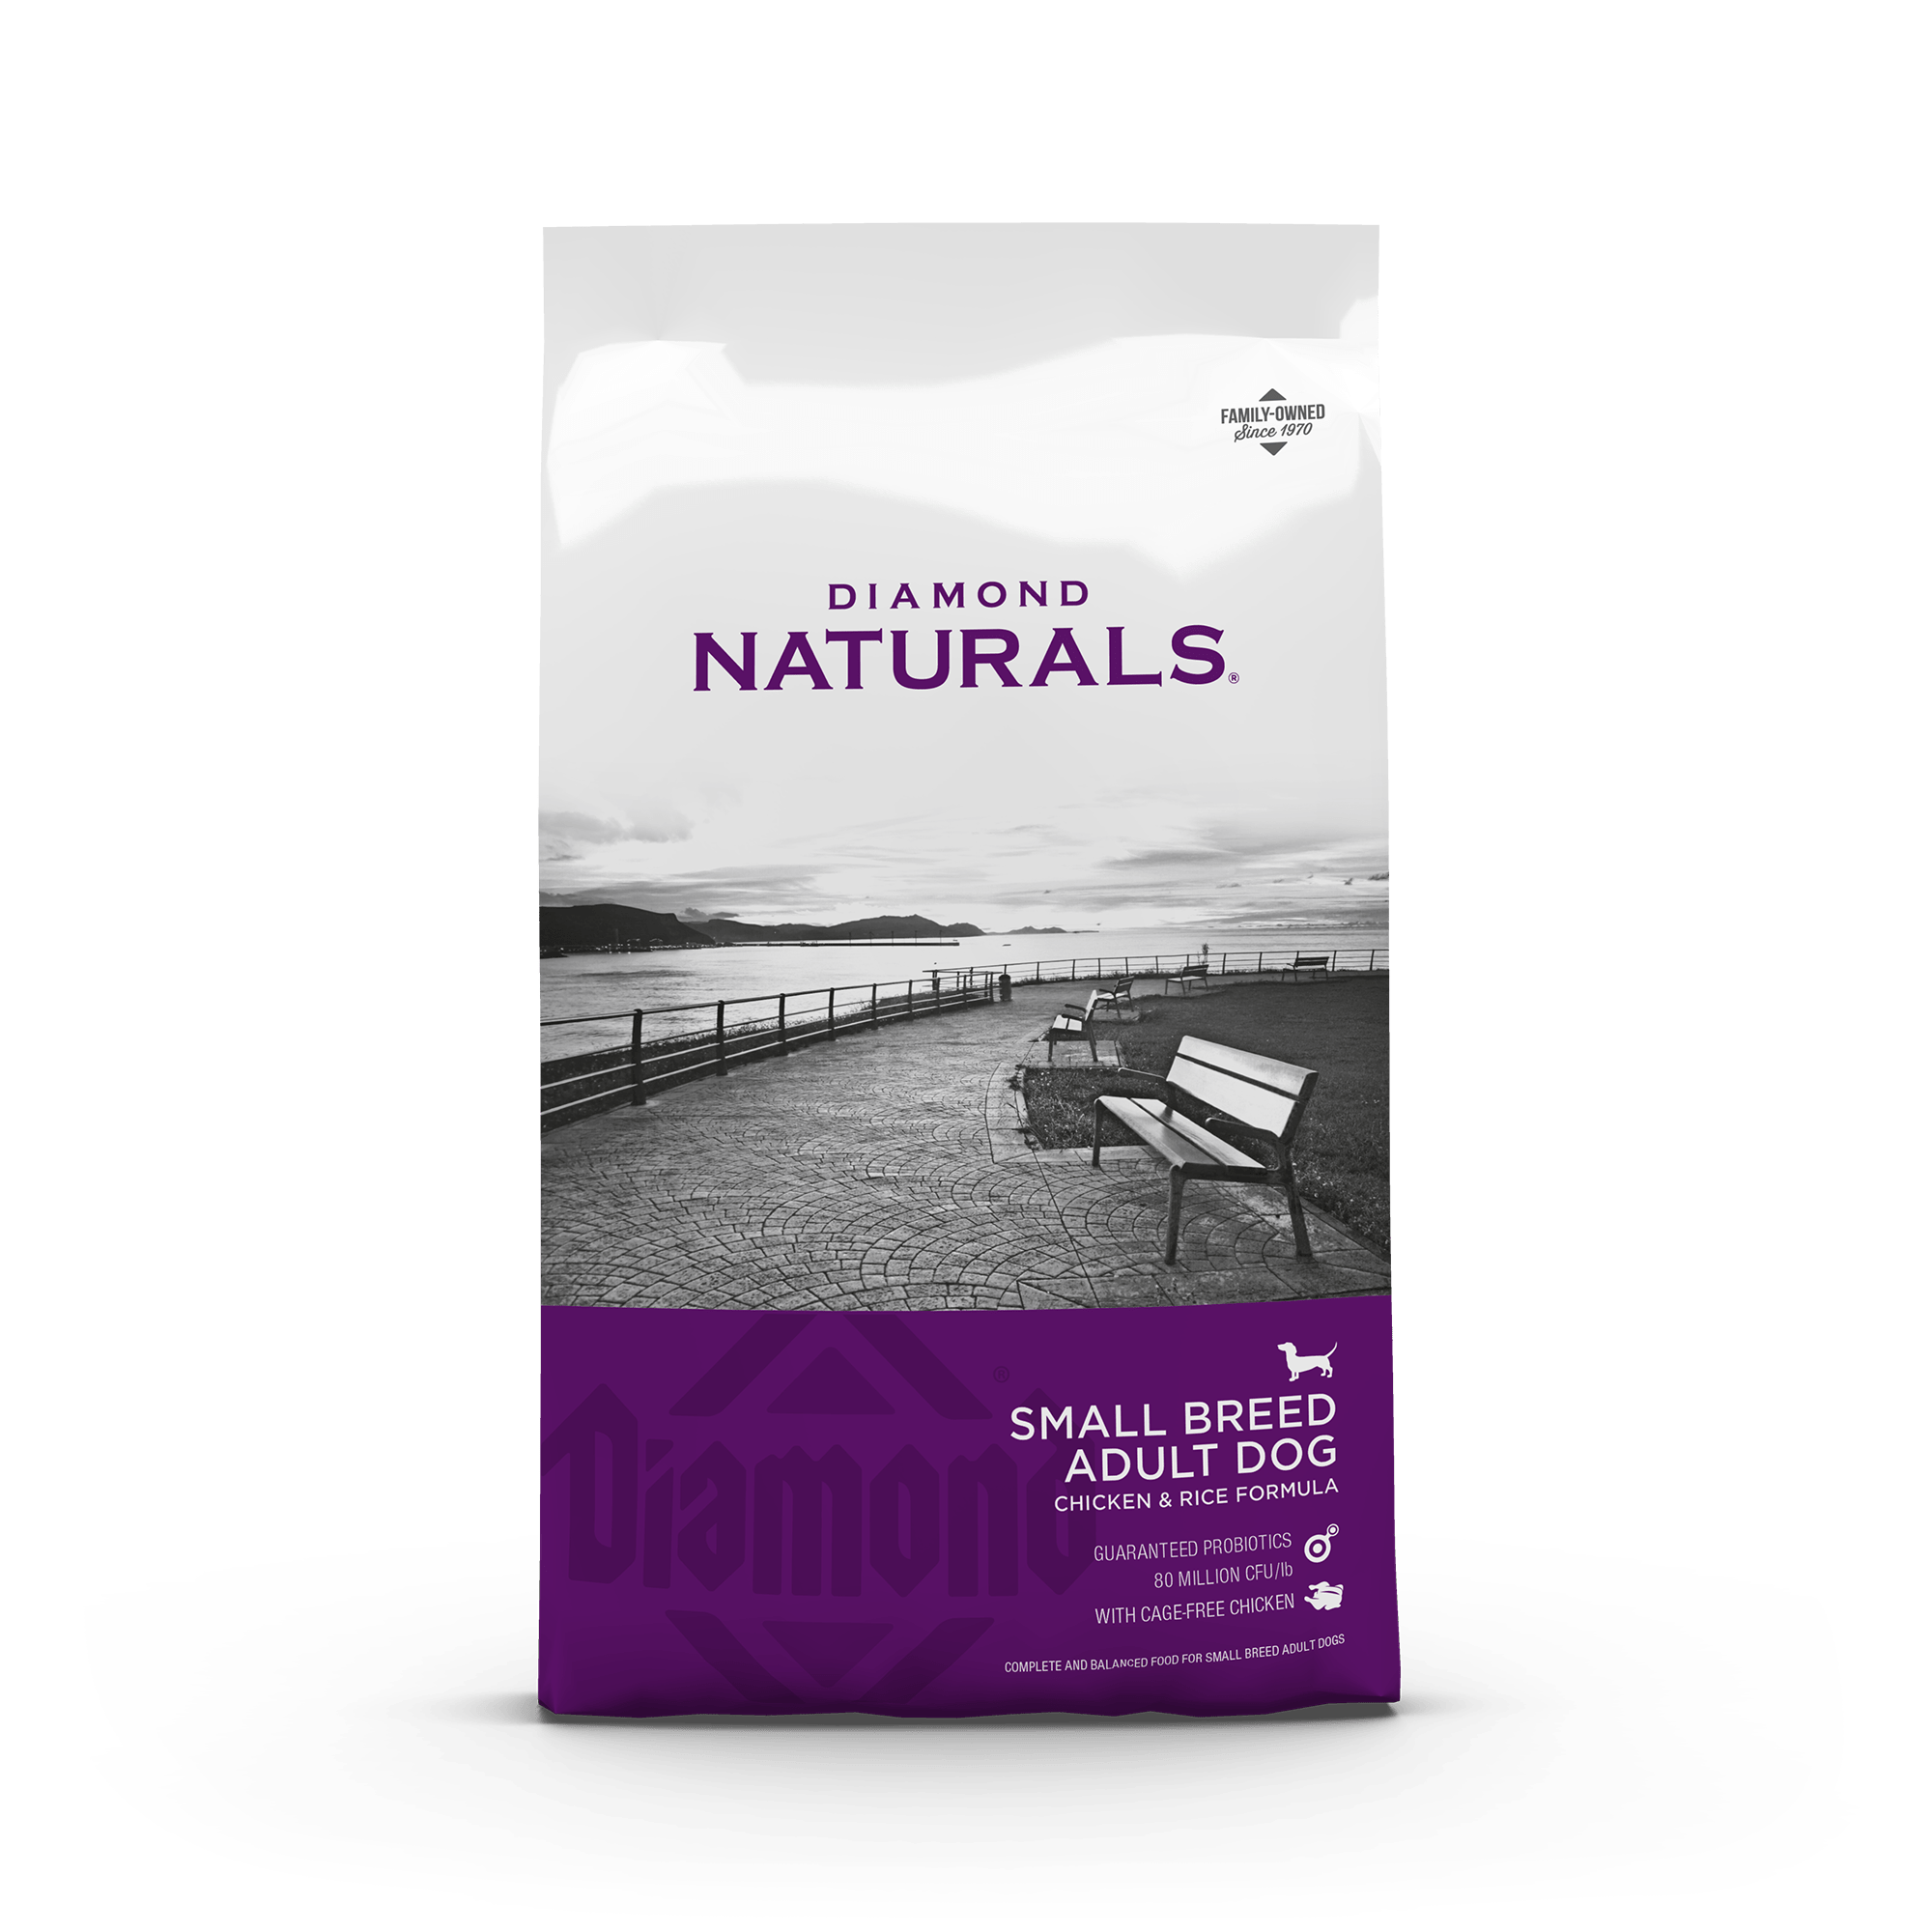 Diamond Naturals Small Breed Adult Dog Chicken & Rice Formula product packaging